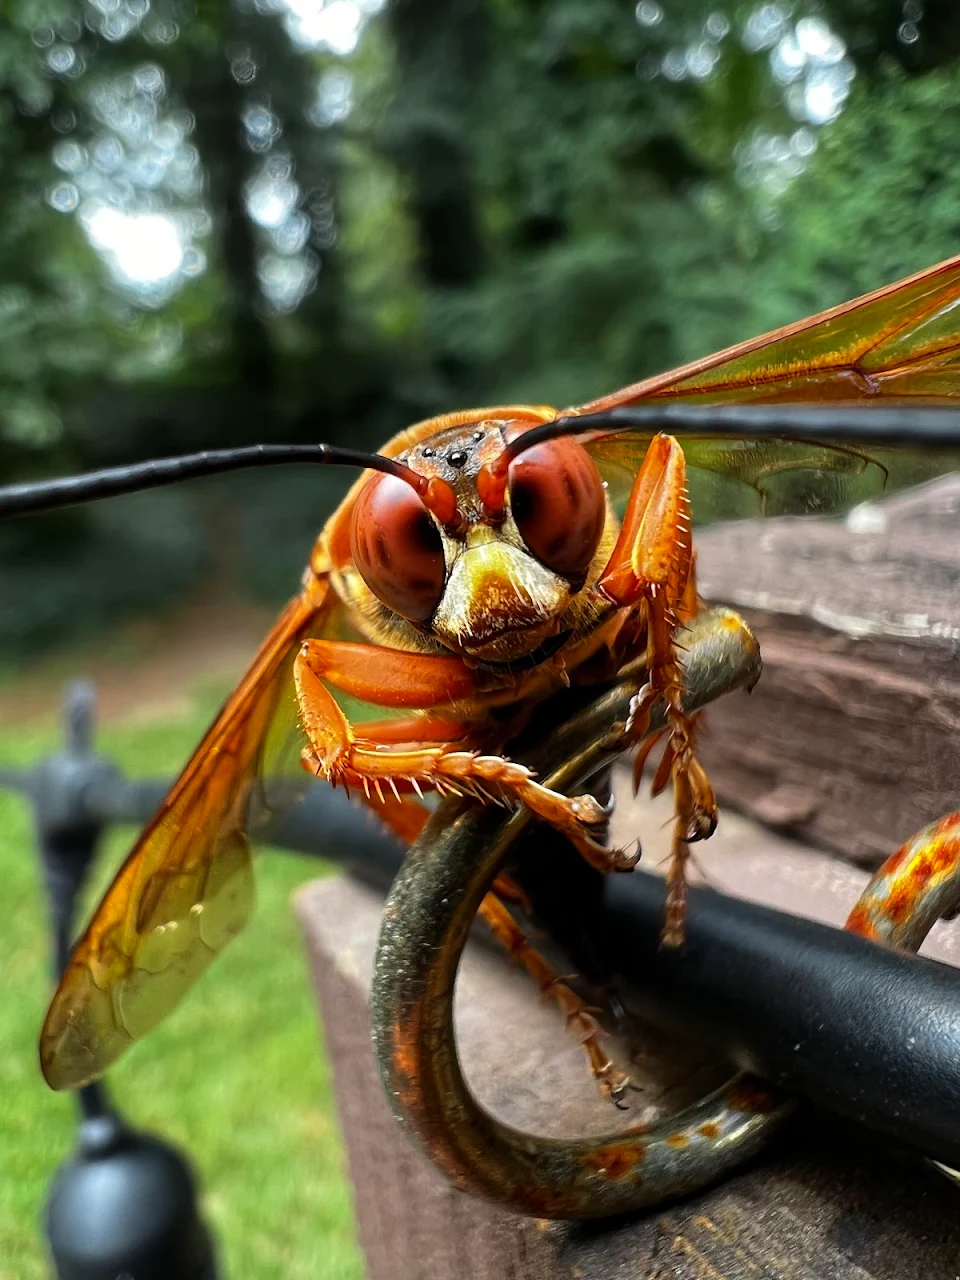 This hornet I captured in my backyard